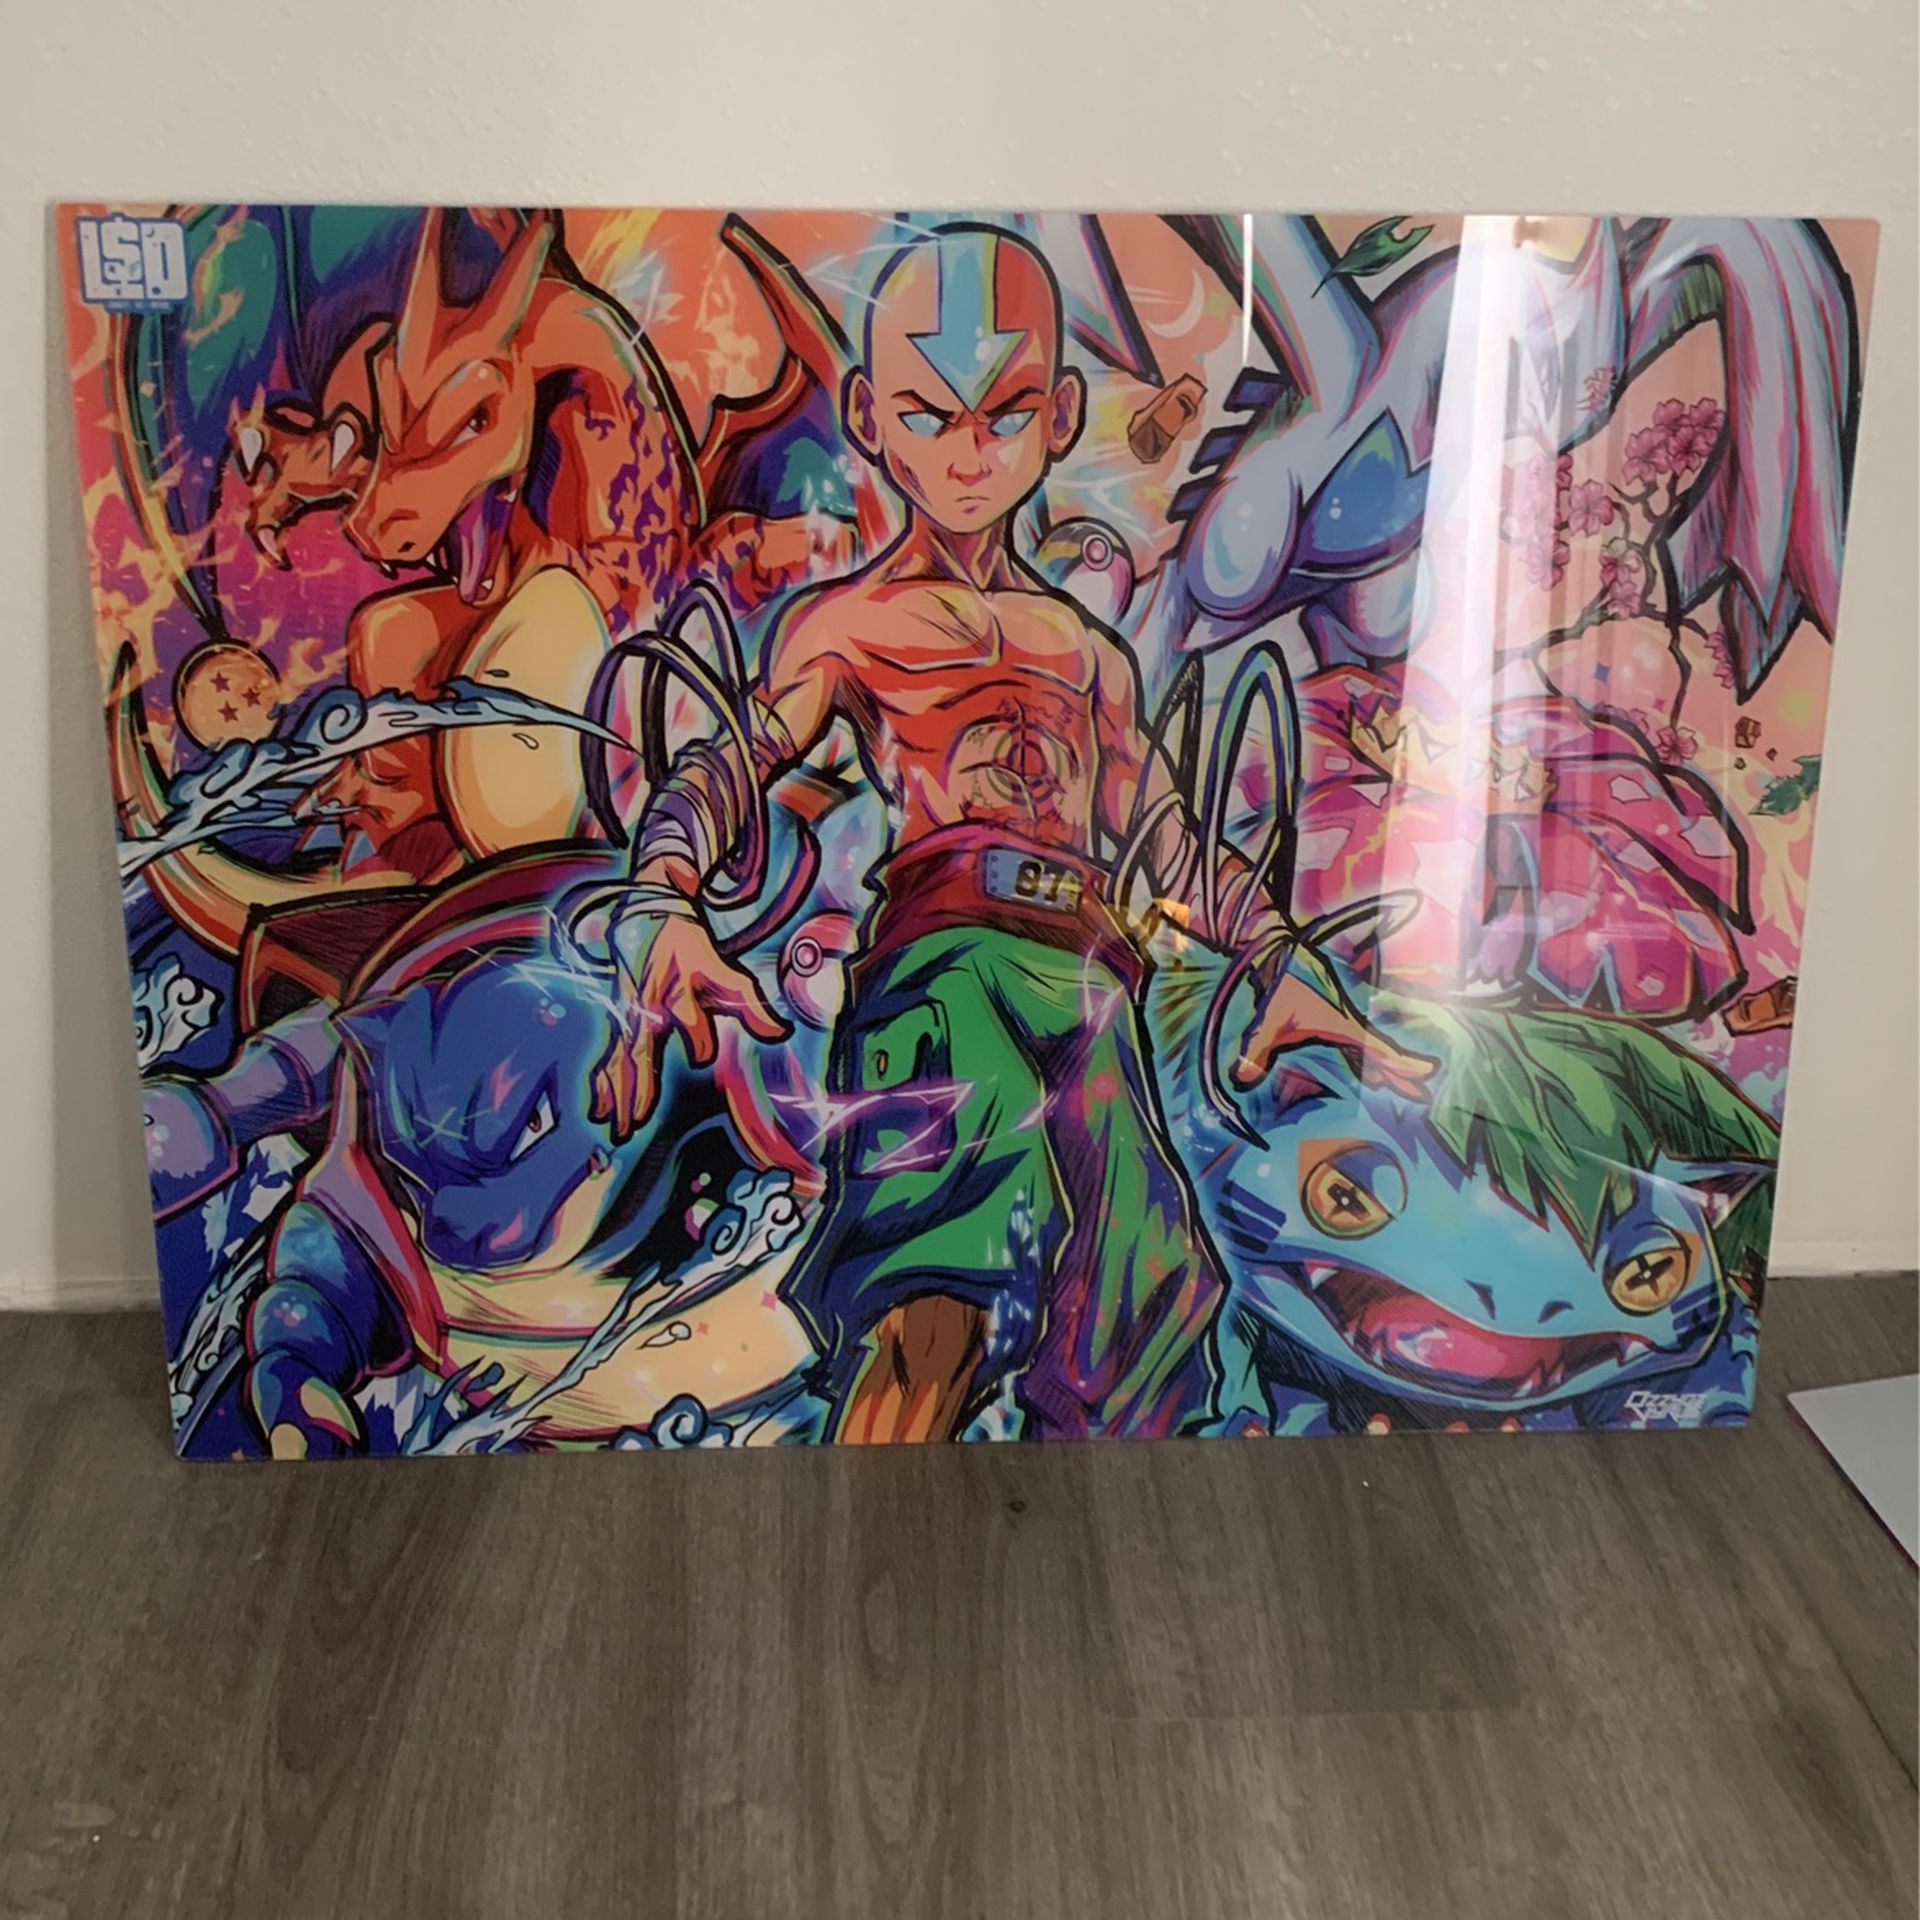 Naruto Eyes (Anime eyes) Canvas Art Print for Sale in Orlando, FL - OfferUp